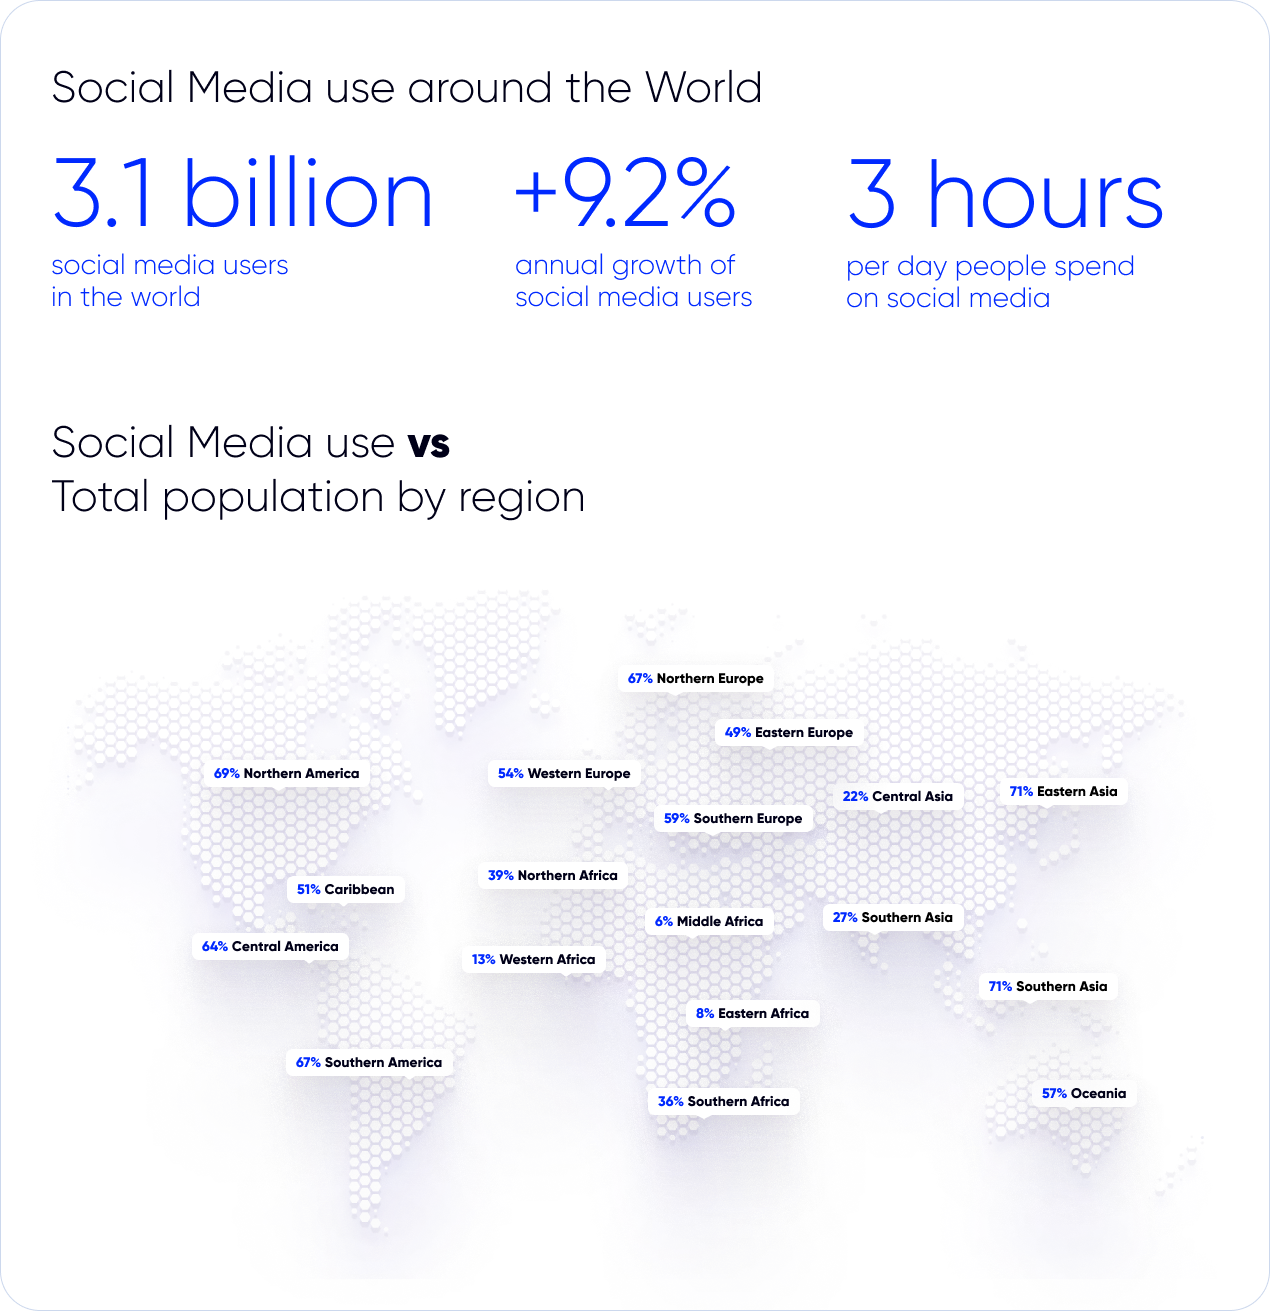 the number of social media users in the world